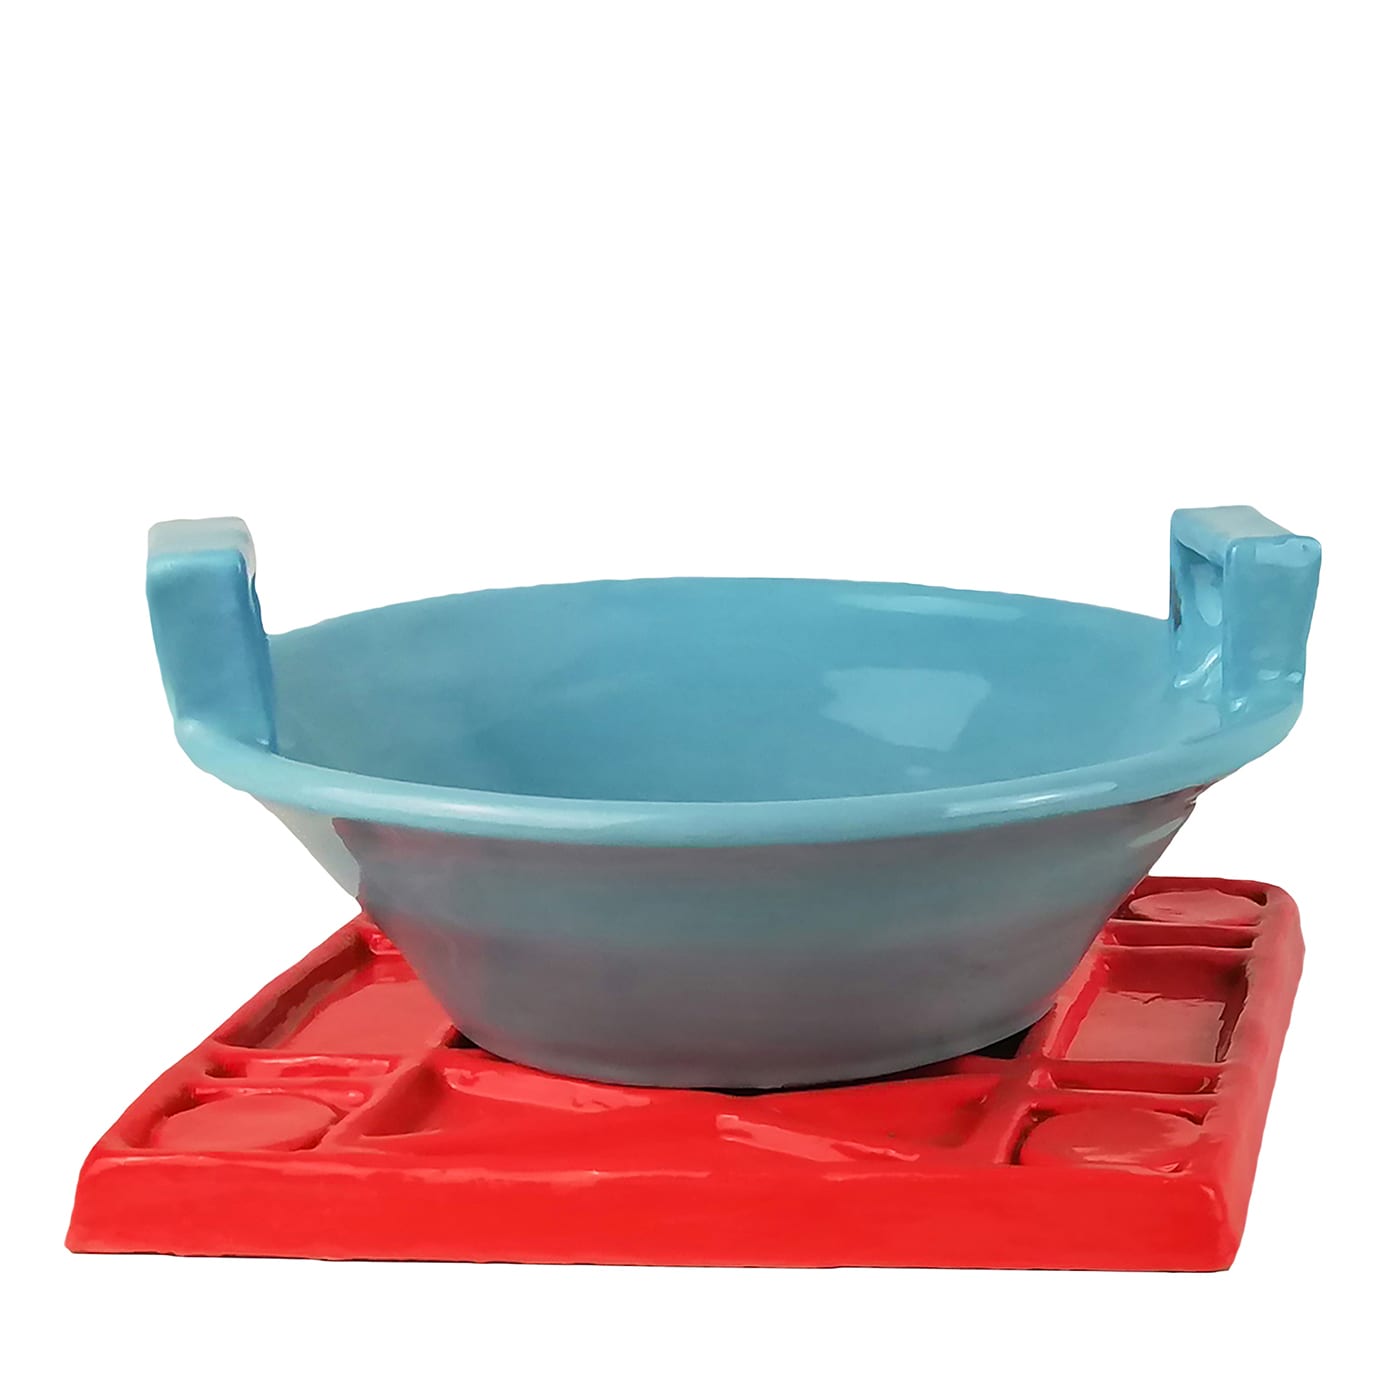 Cofana Set of Blue Soup Plate and Red Charger Plate - Manifatture Pascoski